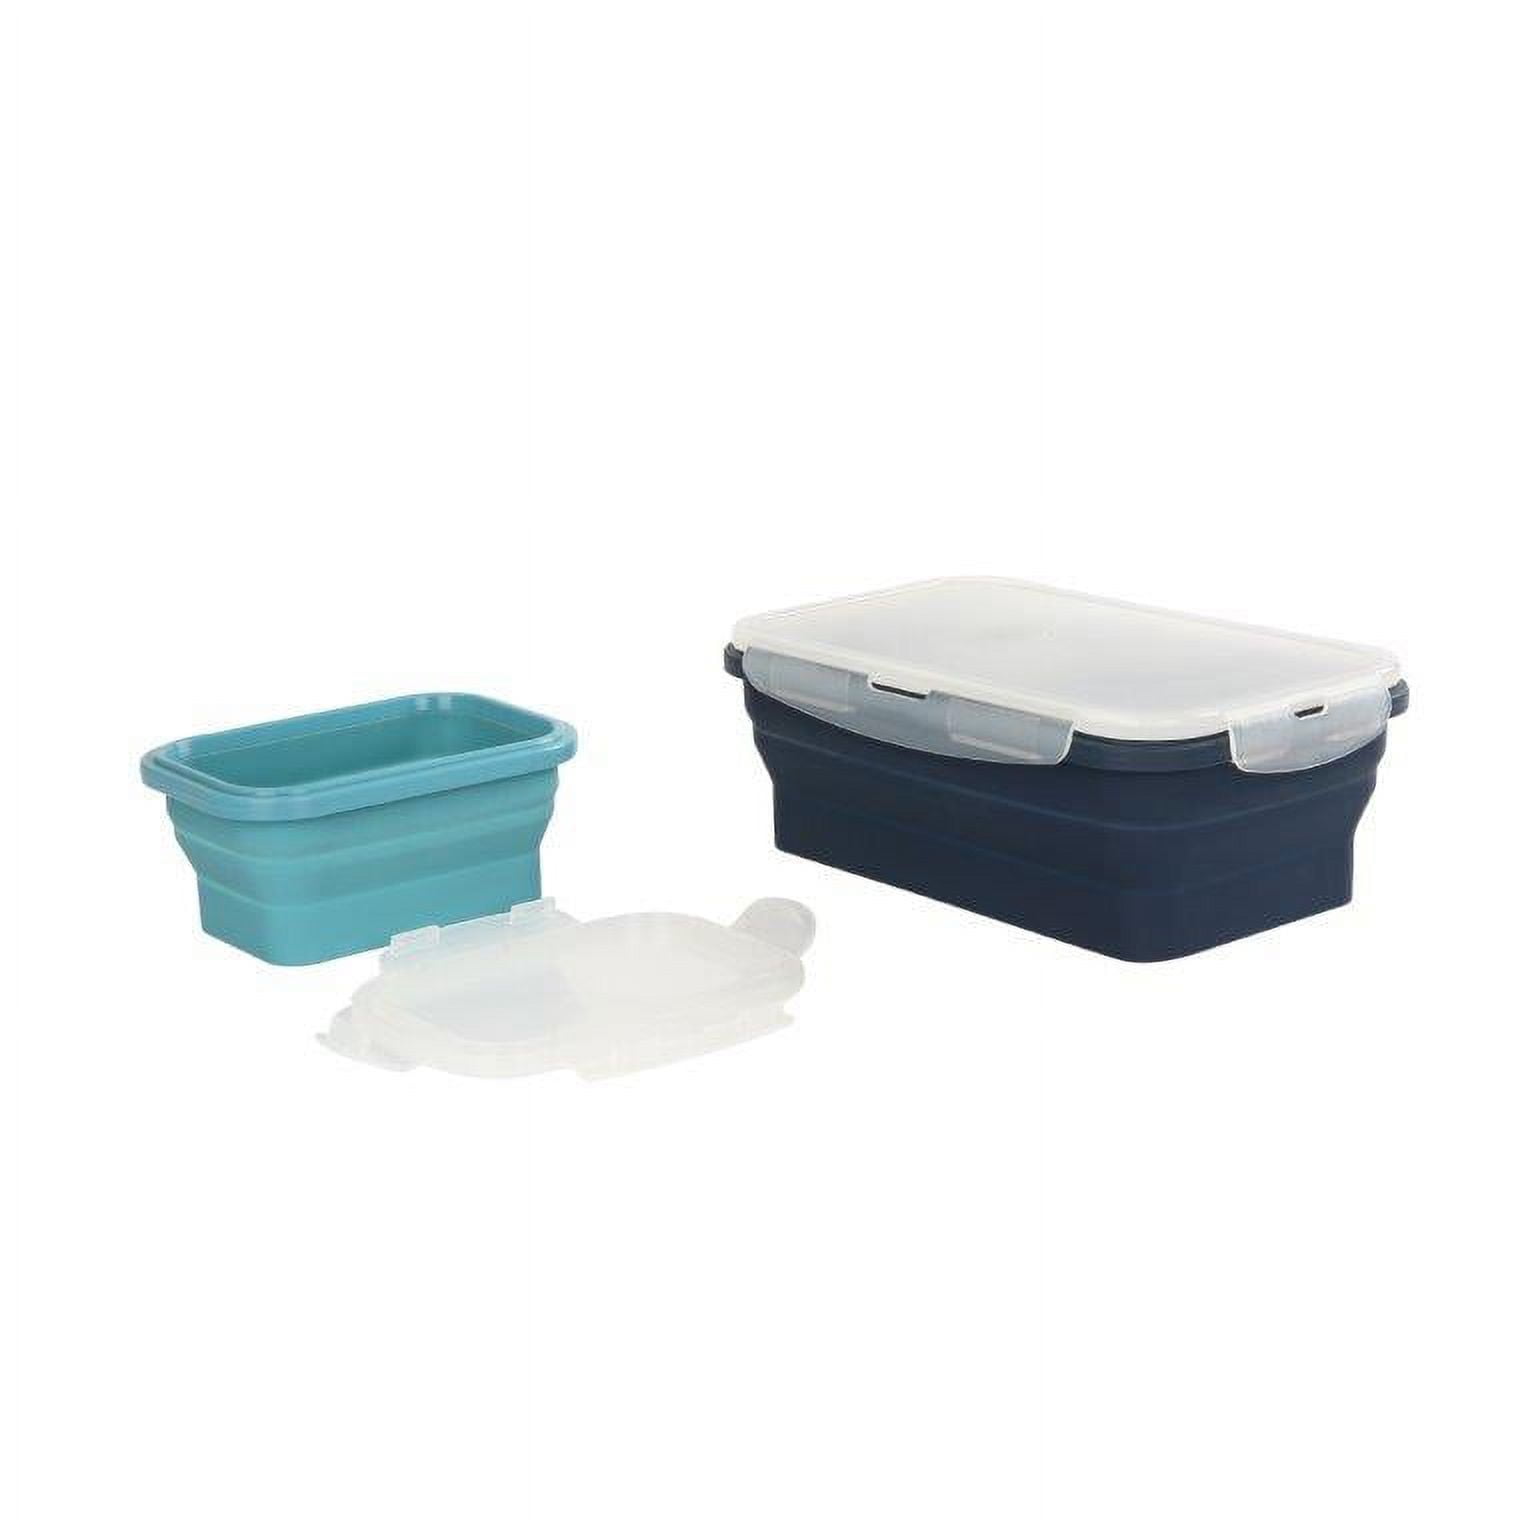 Alimat PluS Silicone Food Storage Containers with Lids - 3 Pack Set  27oz/800ml Collapsible Meal Prep Lunch Containers - Microwave, Freezer and